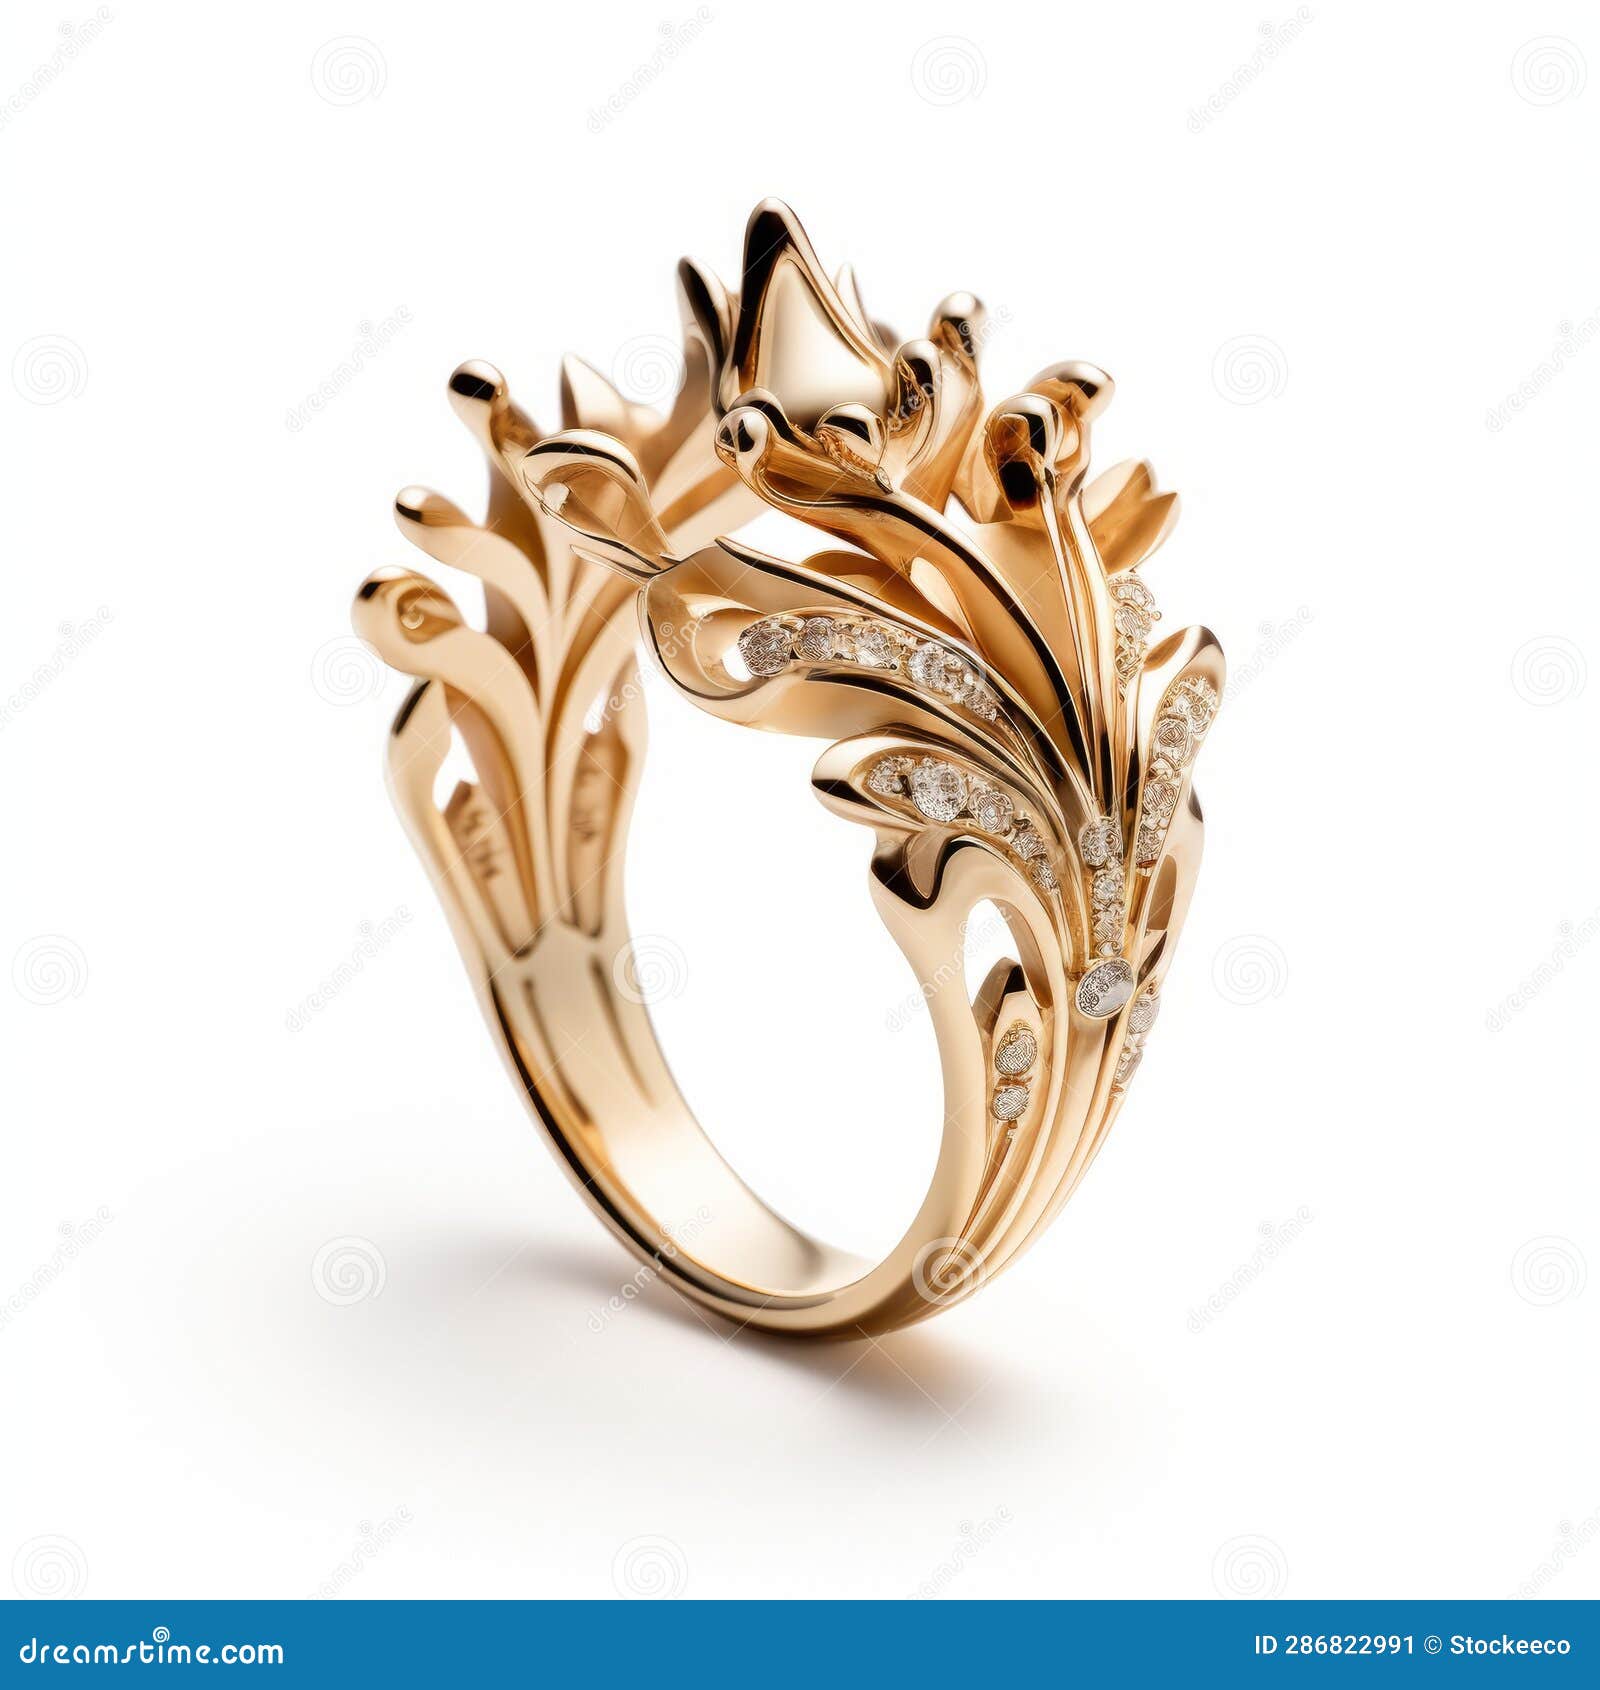 Women's Copper Plated Rose Gold Two-Color Flower Ring - Walmart.com